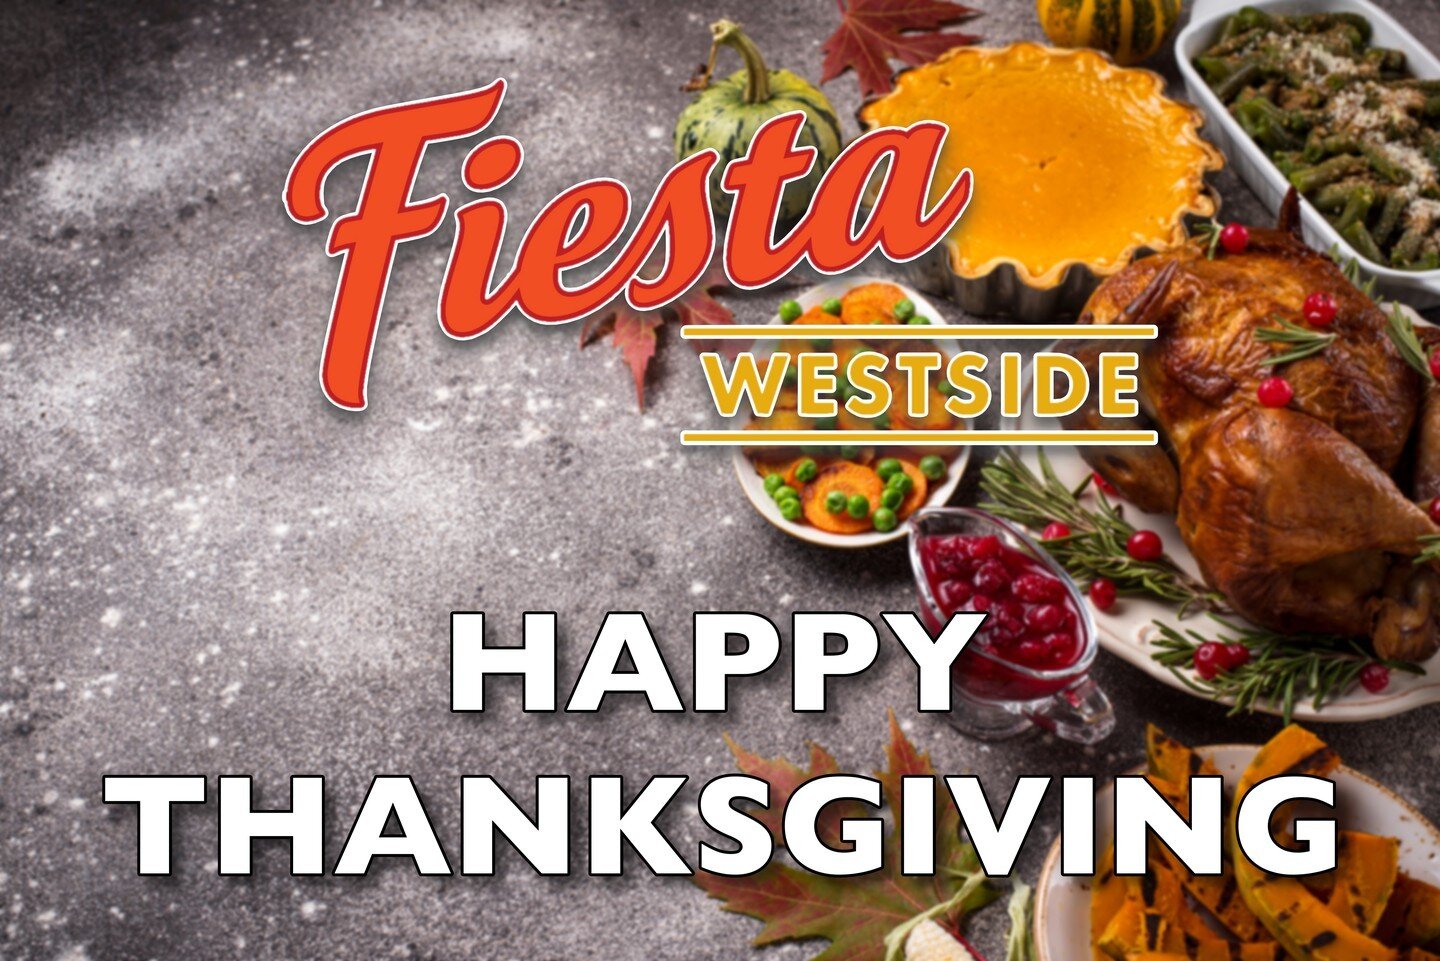 🍁🦃 Dear Fiesta Westside friends, in the spirit of Thanksgiving, we'll be closed to allow our staff to savor precious moments with their loved ones. May your day be filled with warmth, gratitude, and the joy of togetherness. Happy Thanksgiving from 